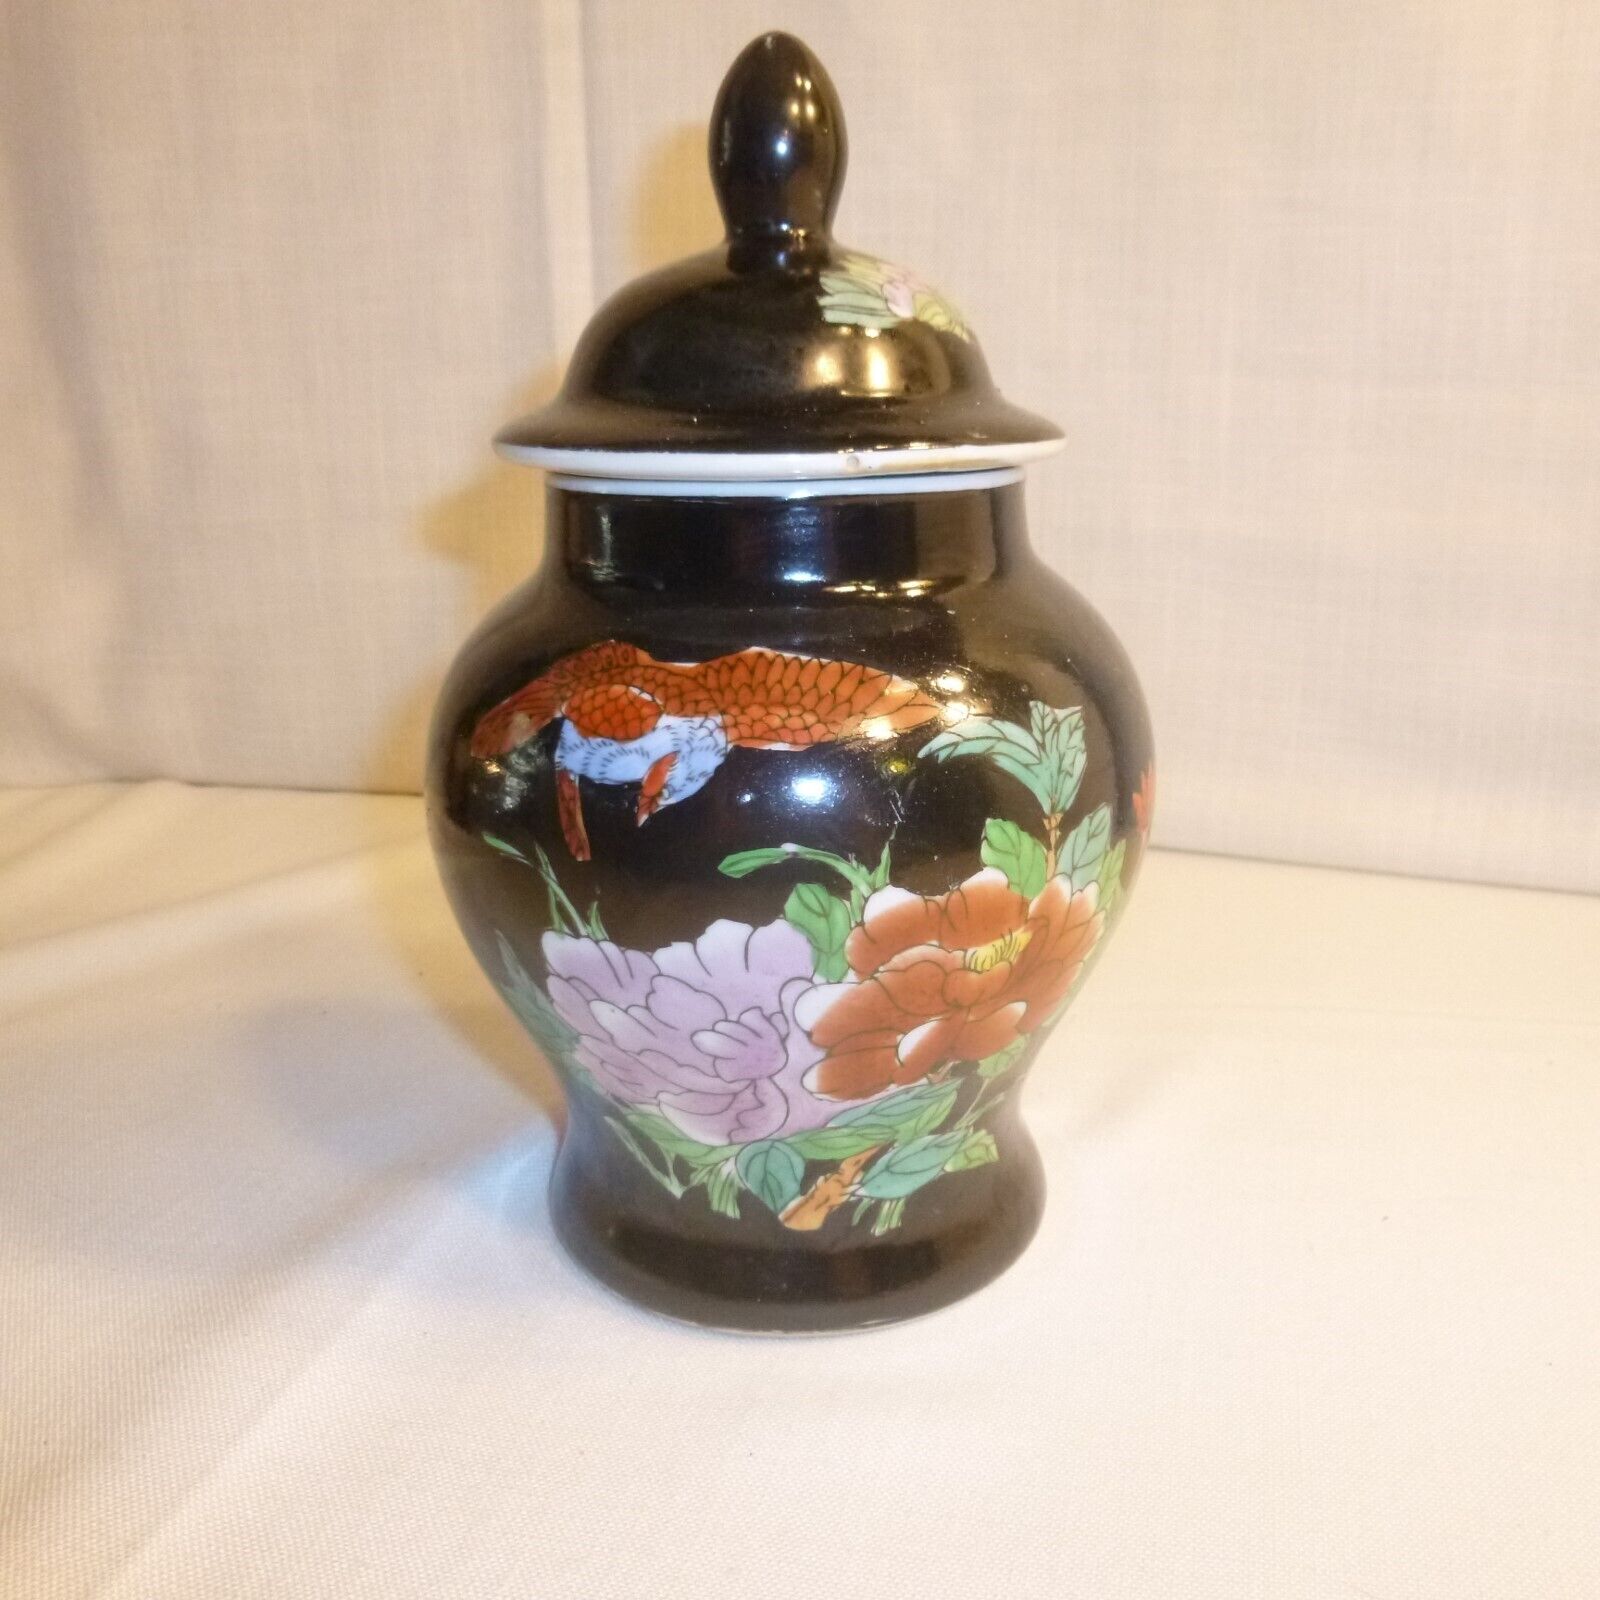 Ginger Jar / Urn w Lid - Black w colorful flowers and fish - MINT